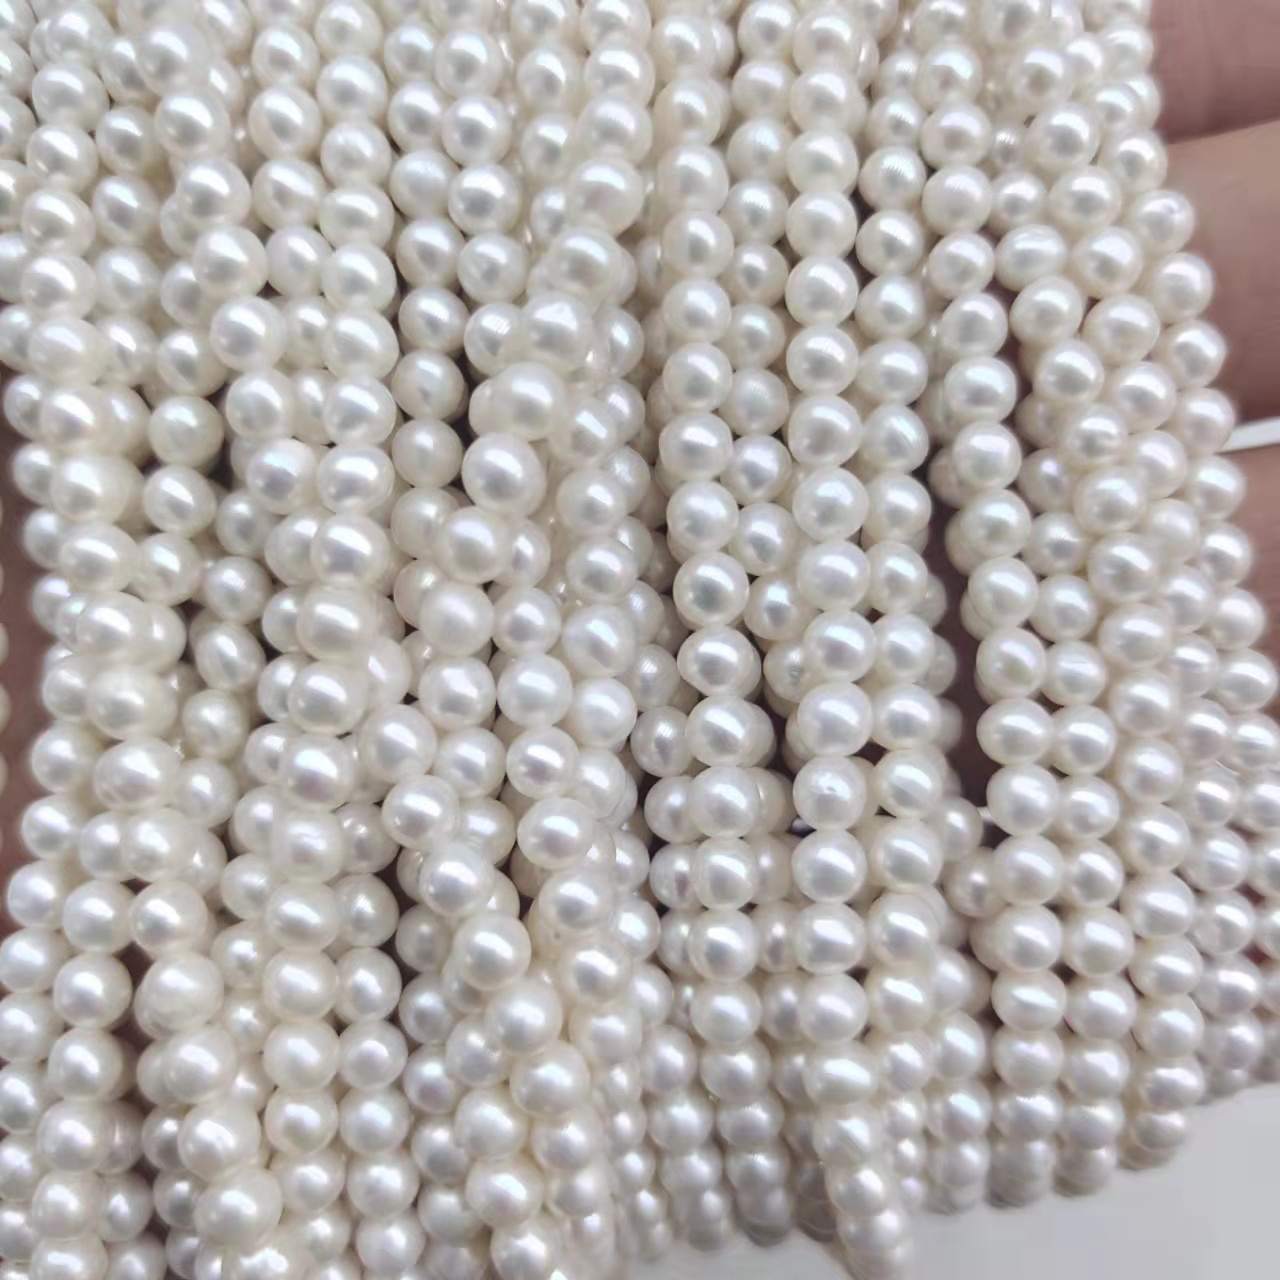 3-7.5 mm AAA good quality round shape natural freshwater pearls in strand loose pearl wholesale price